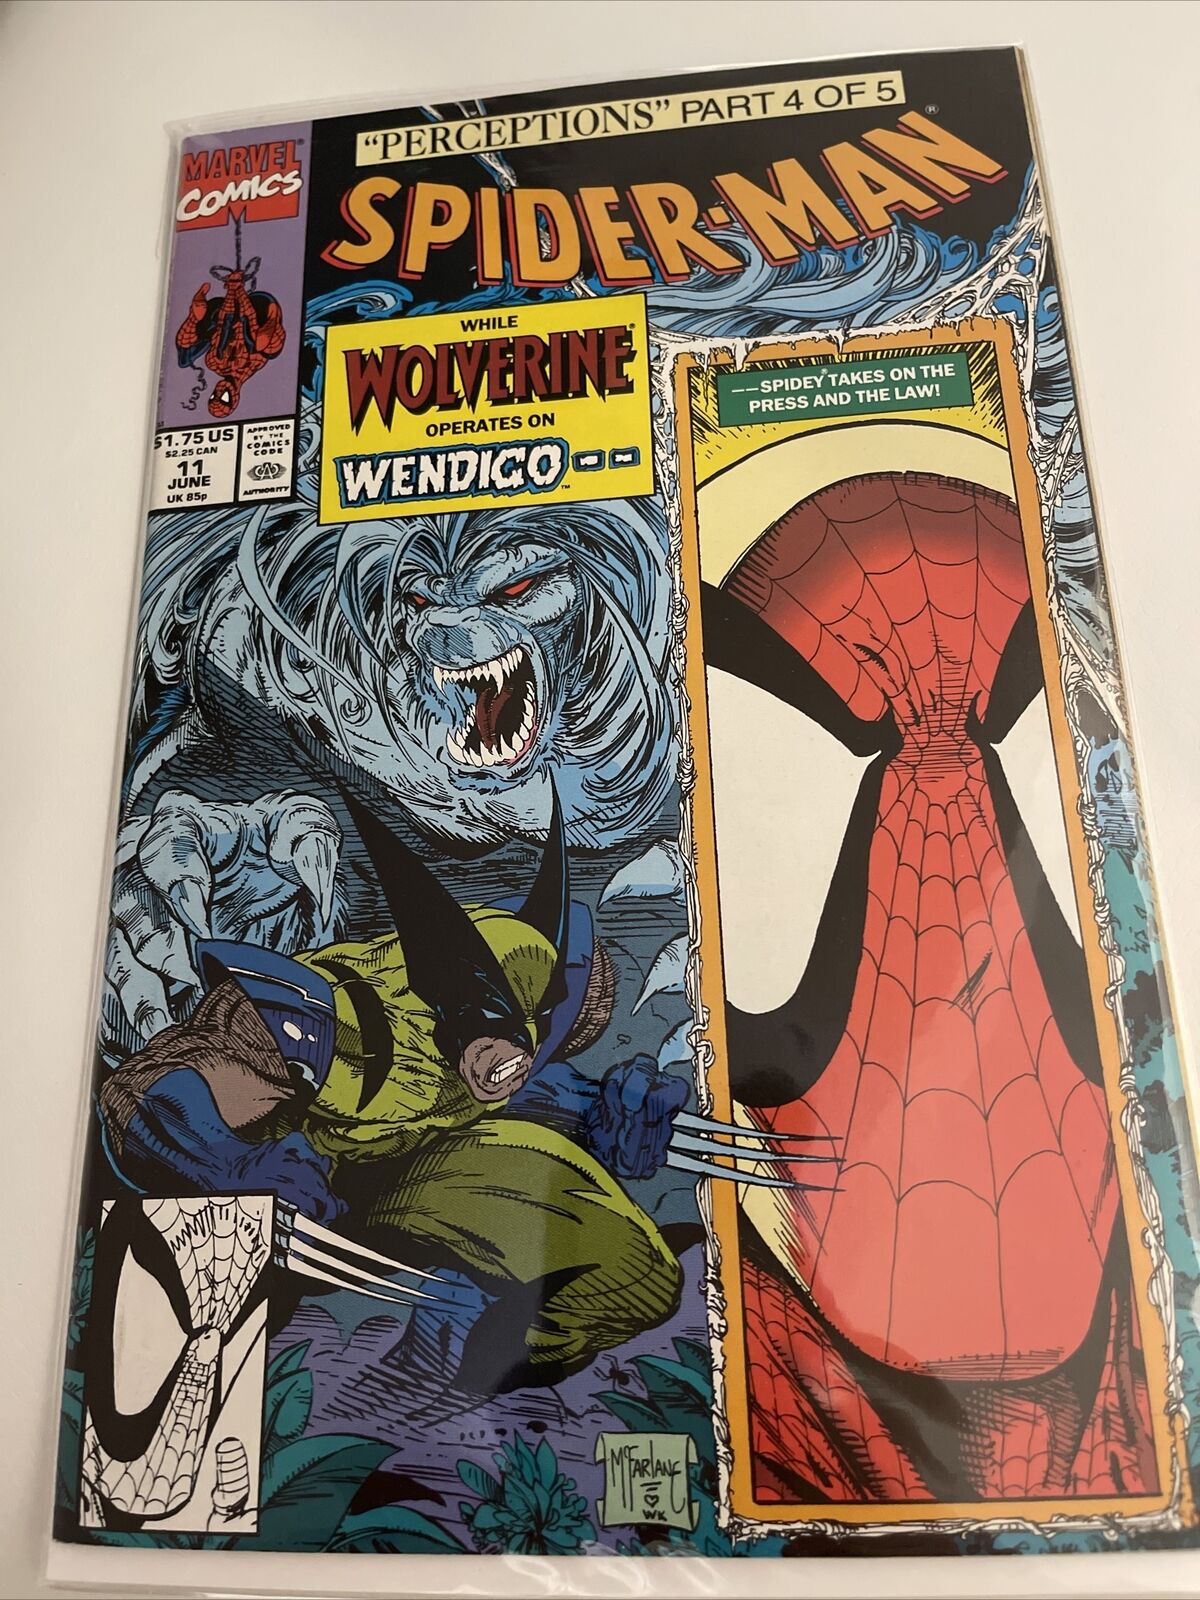 Spider-Man 11 Perceptions: Part 4 of 5. Guest-starring Wolverine June 1991